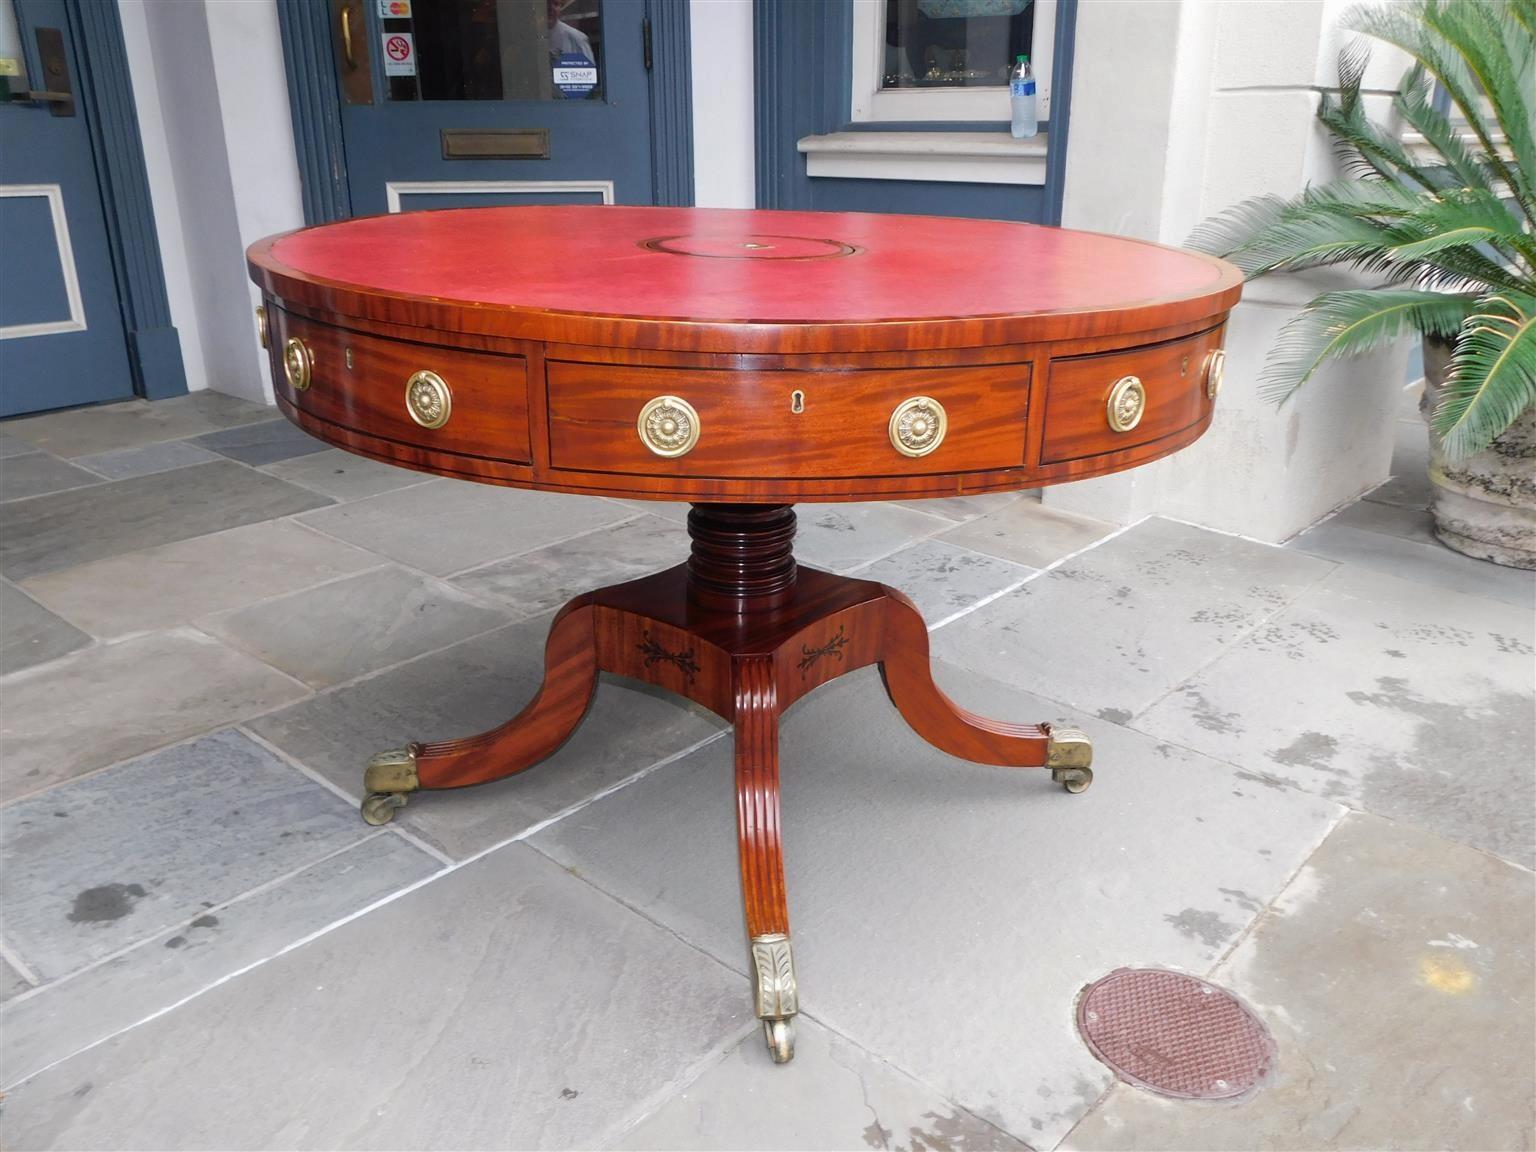 English Regency Mahogany Leather Top Ebony Inlaid Rent Table, Circa 1790 In Excellent Condition For Sale In Hollywood, SC